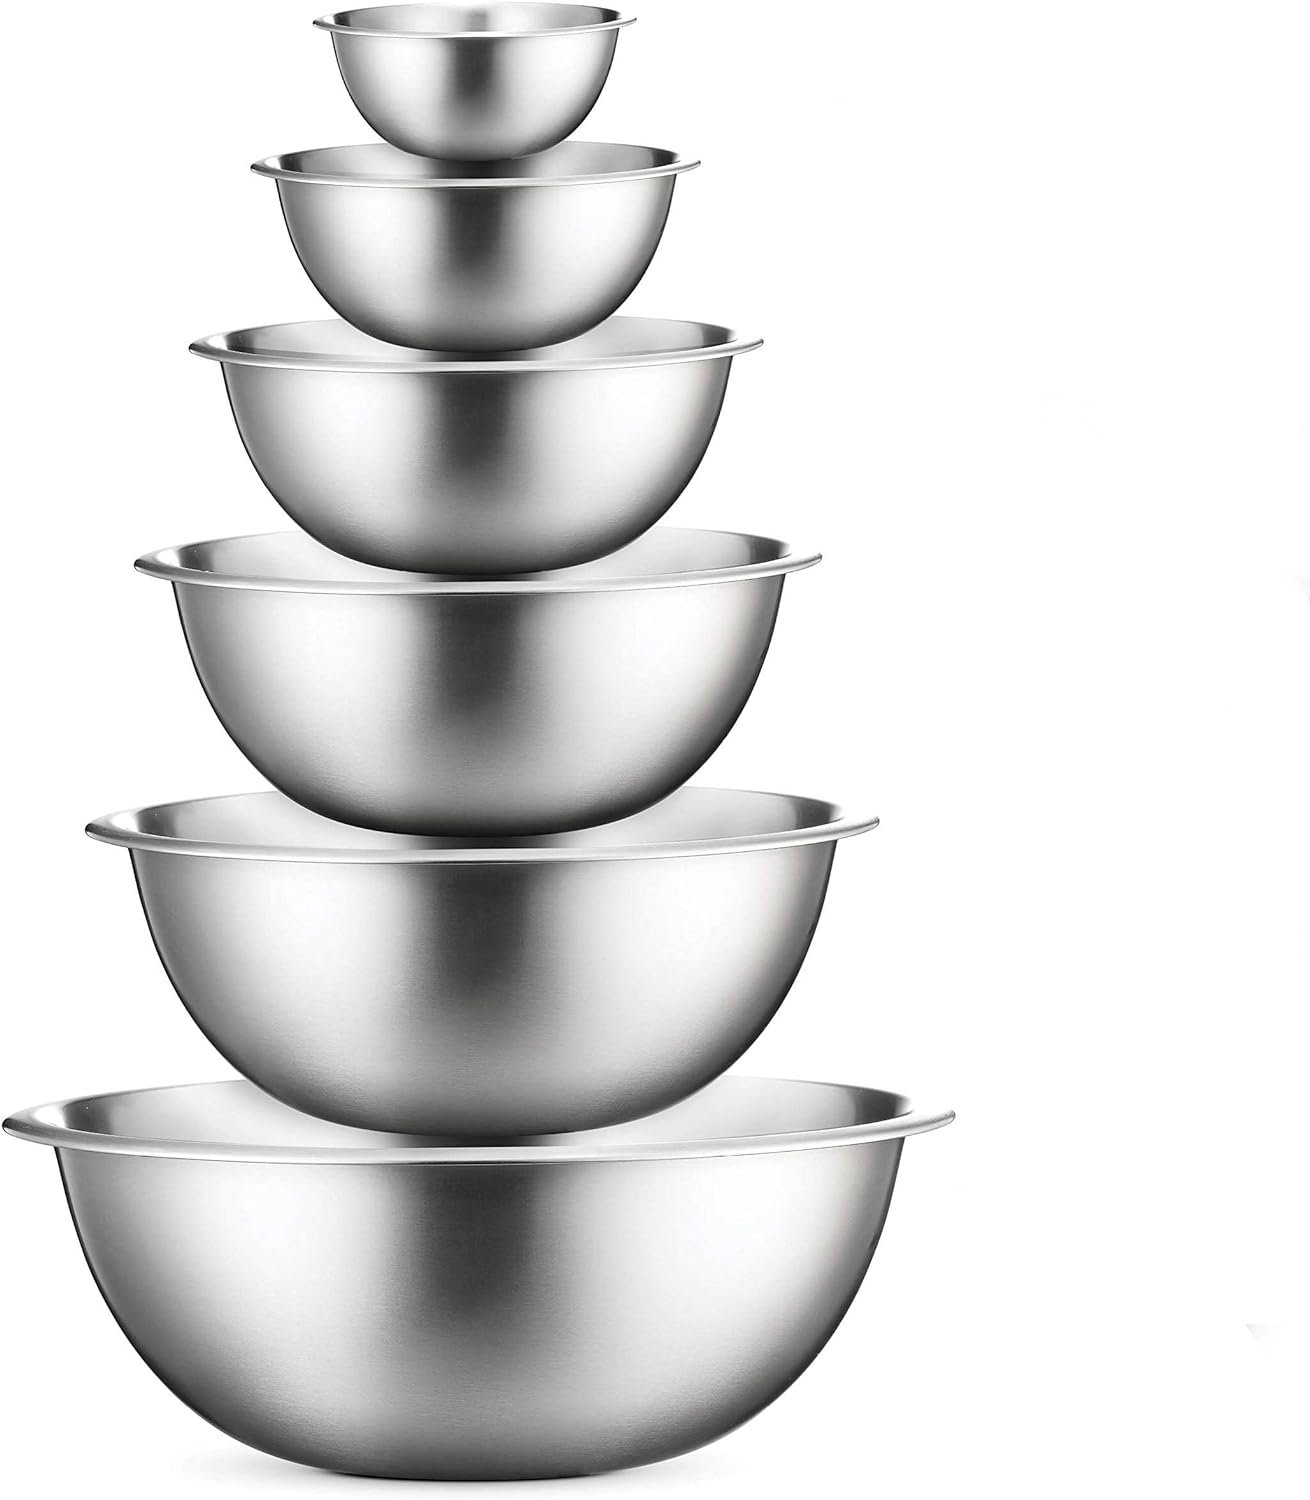 FineDine Stainless Steel Mixing Bowls (Set of 6) - Easy To Clean, Nesting Bowls for Space Saving Storage, Great for Cooking, Baking, Prepping